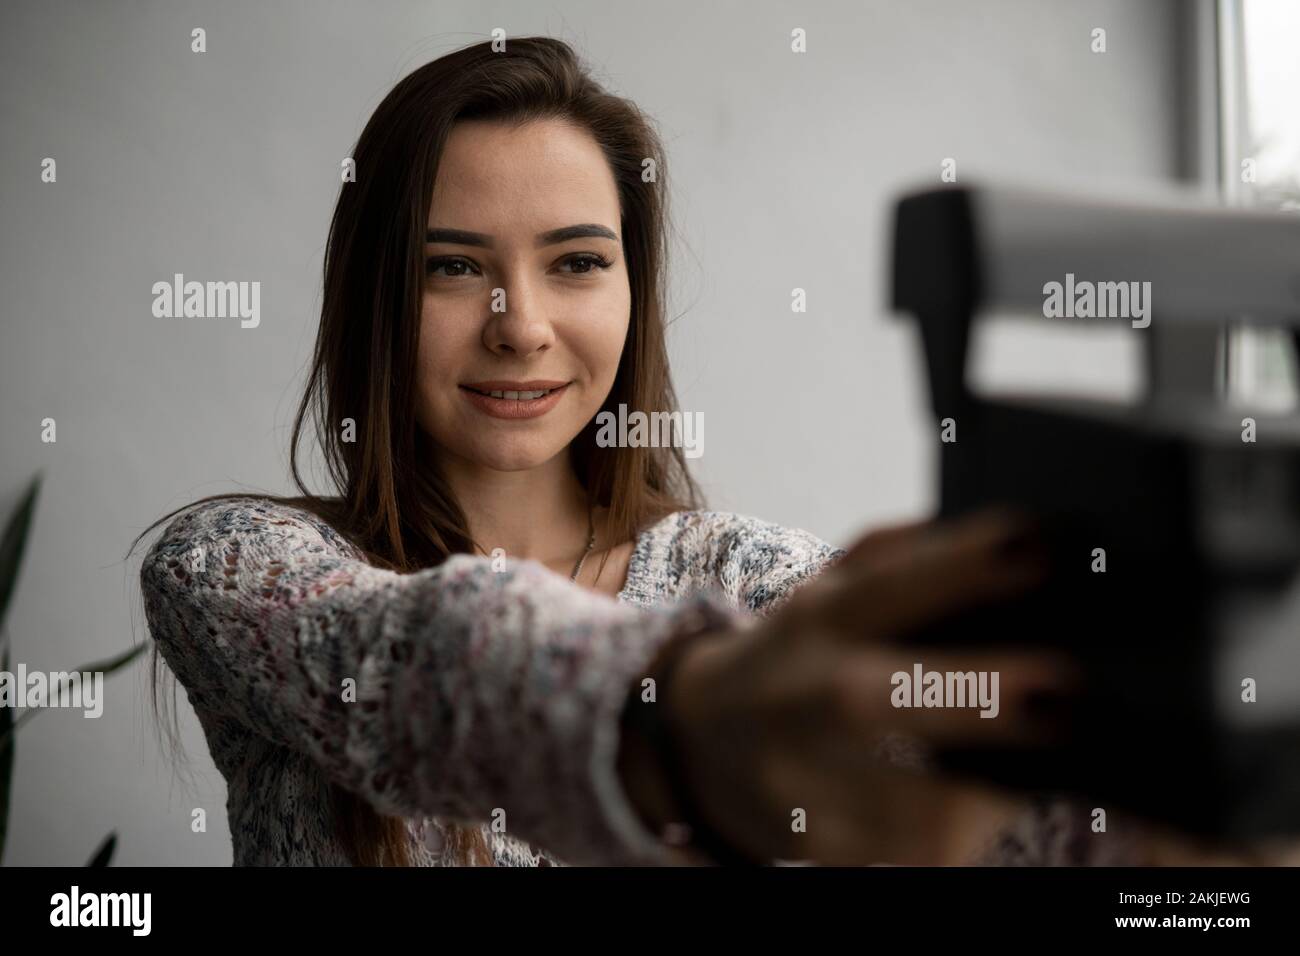 Smiling young brunette woman takes photographs selfie portrait with old photo camera. Stock Photo